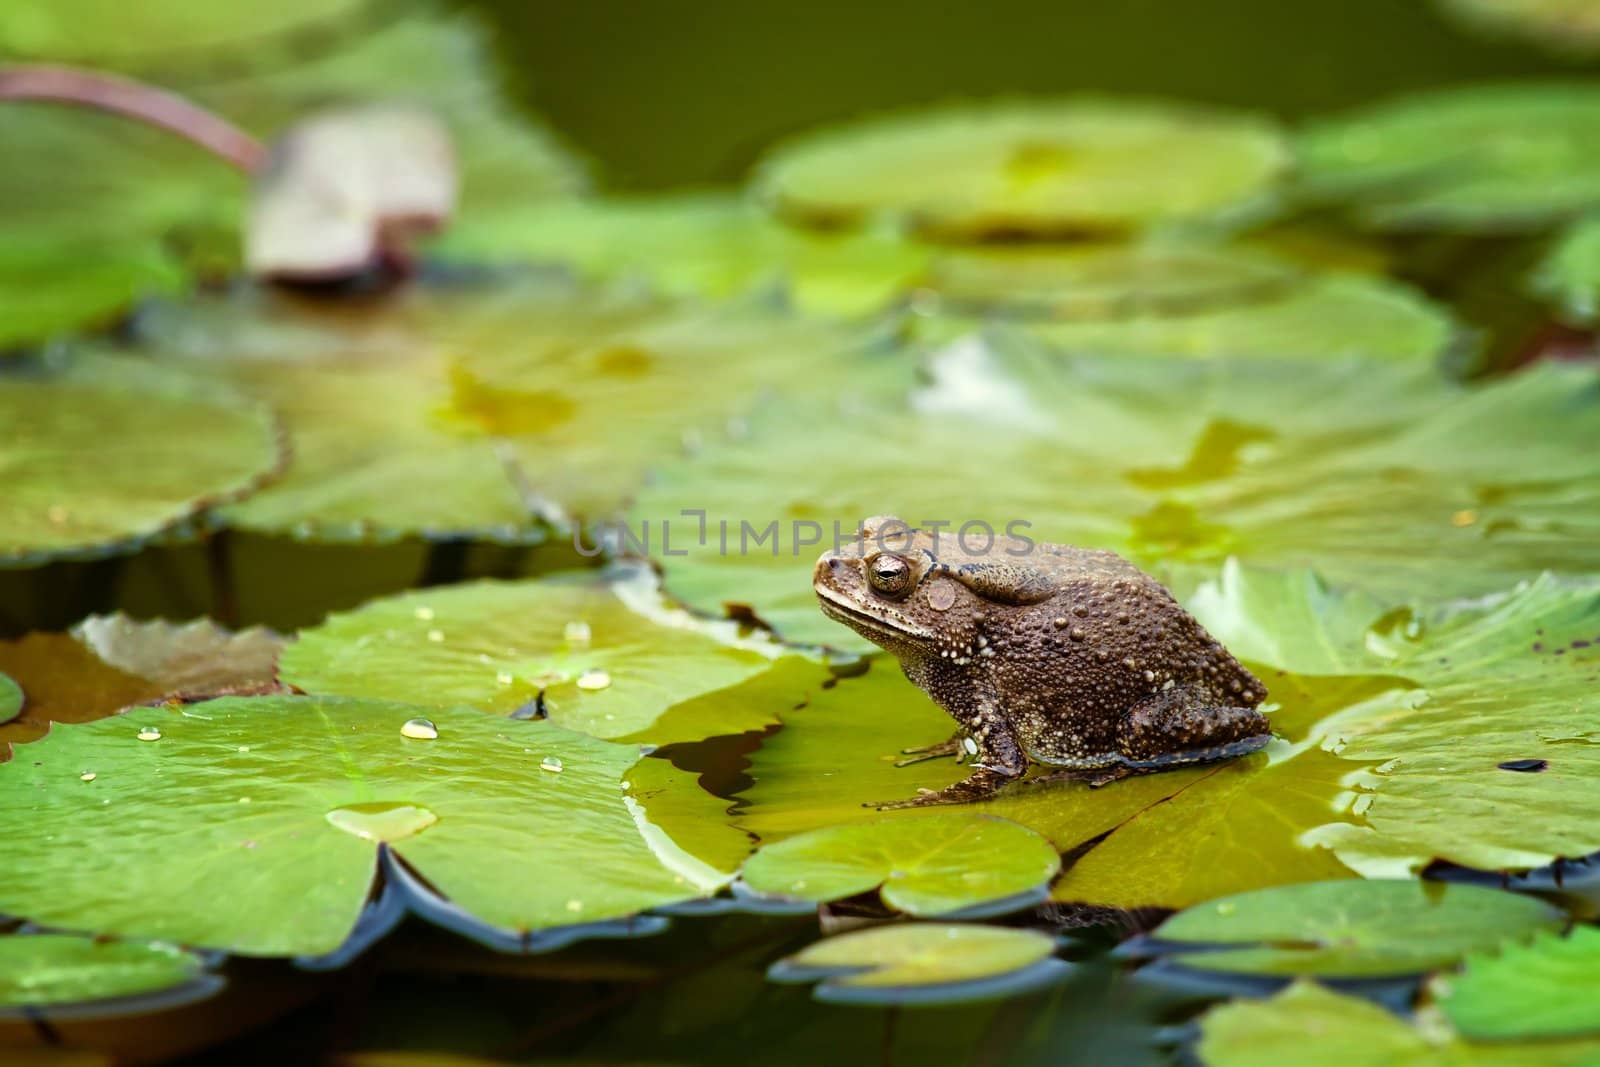 great image of a bull frog or toad on a lilypad